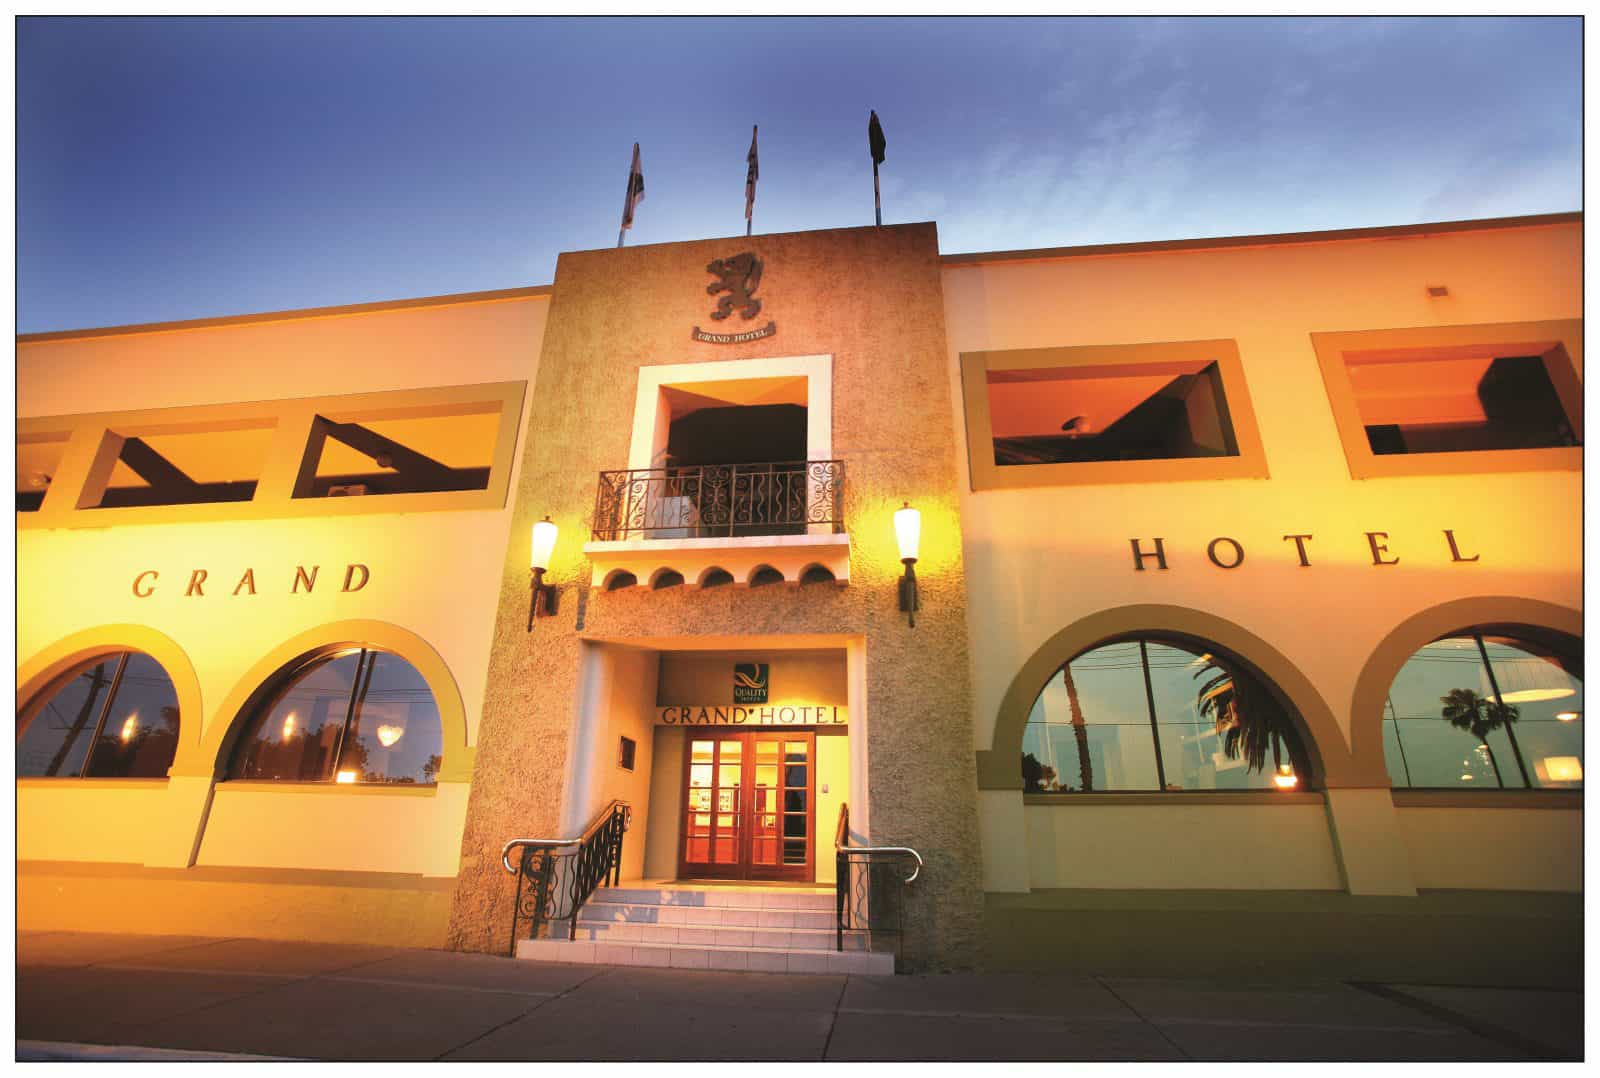 Quality Hotel Mildura Grand is superbly located in the heart of Mildura’s shopping and dining precin